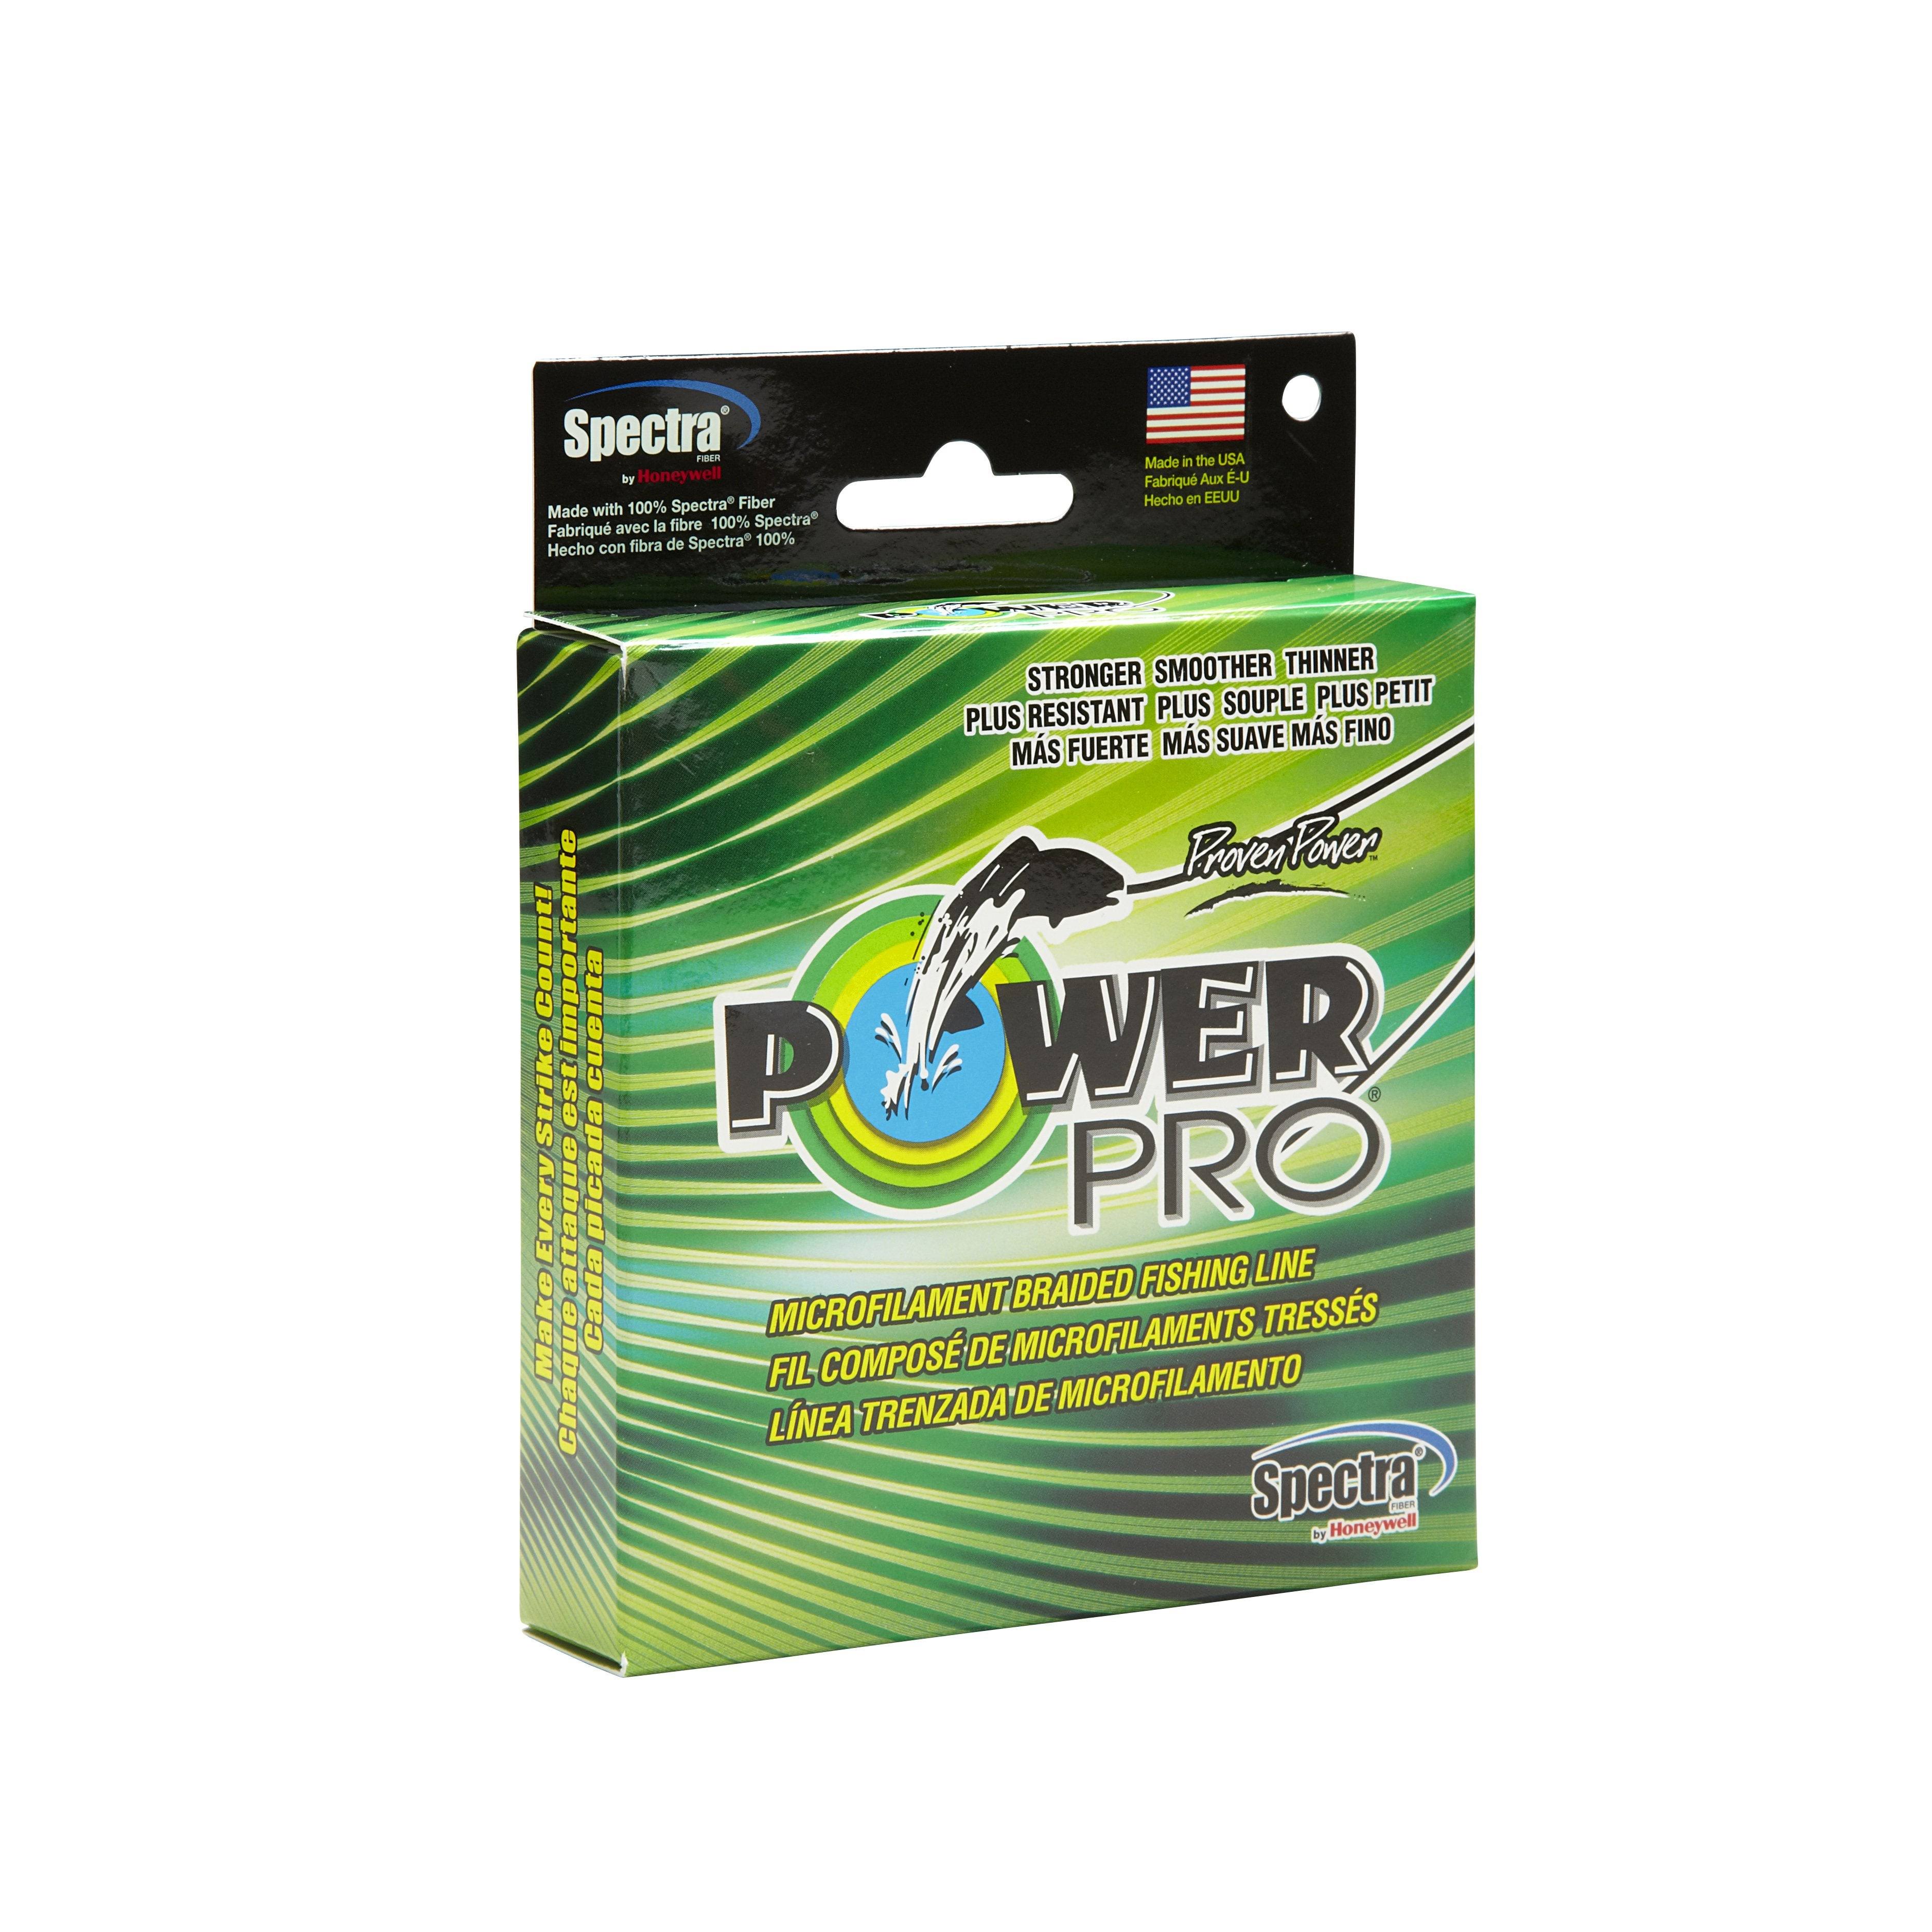 Spectra Power Pro Proven Power Microfilament Braided Fishing Line - 150yds